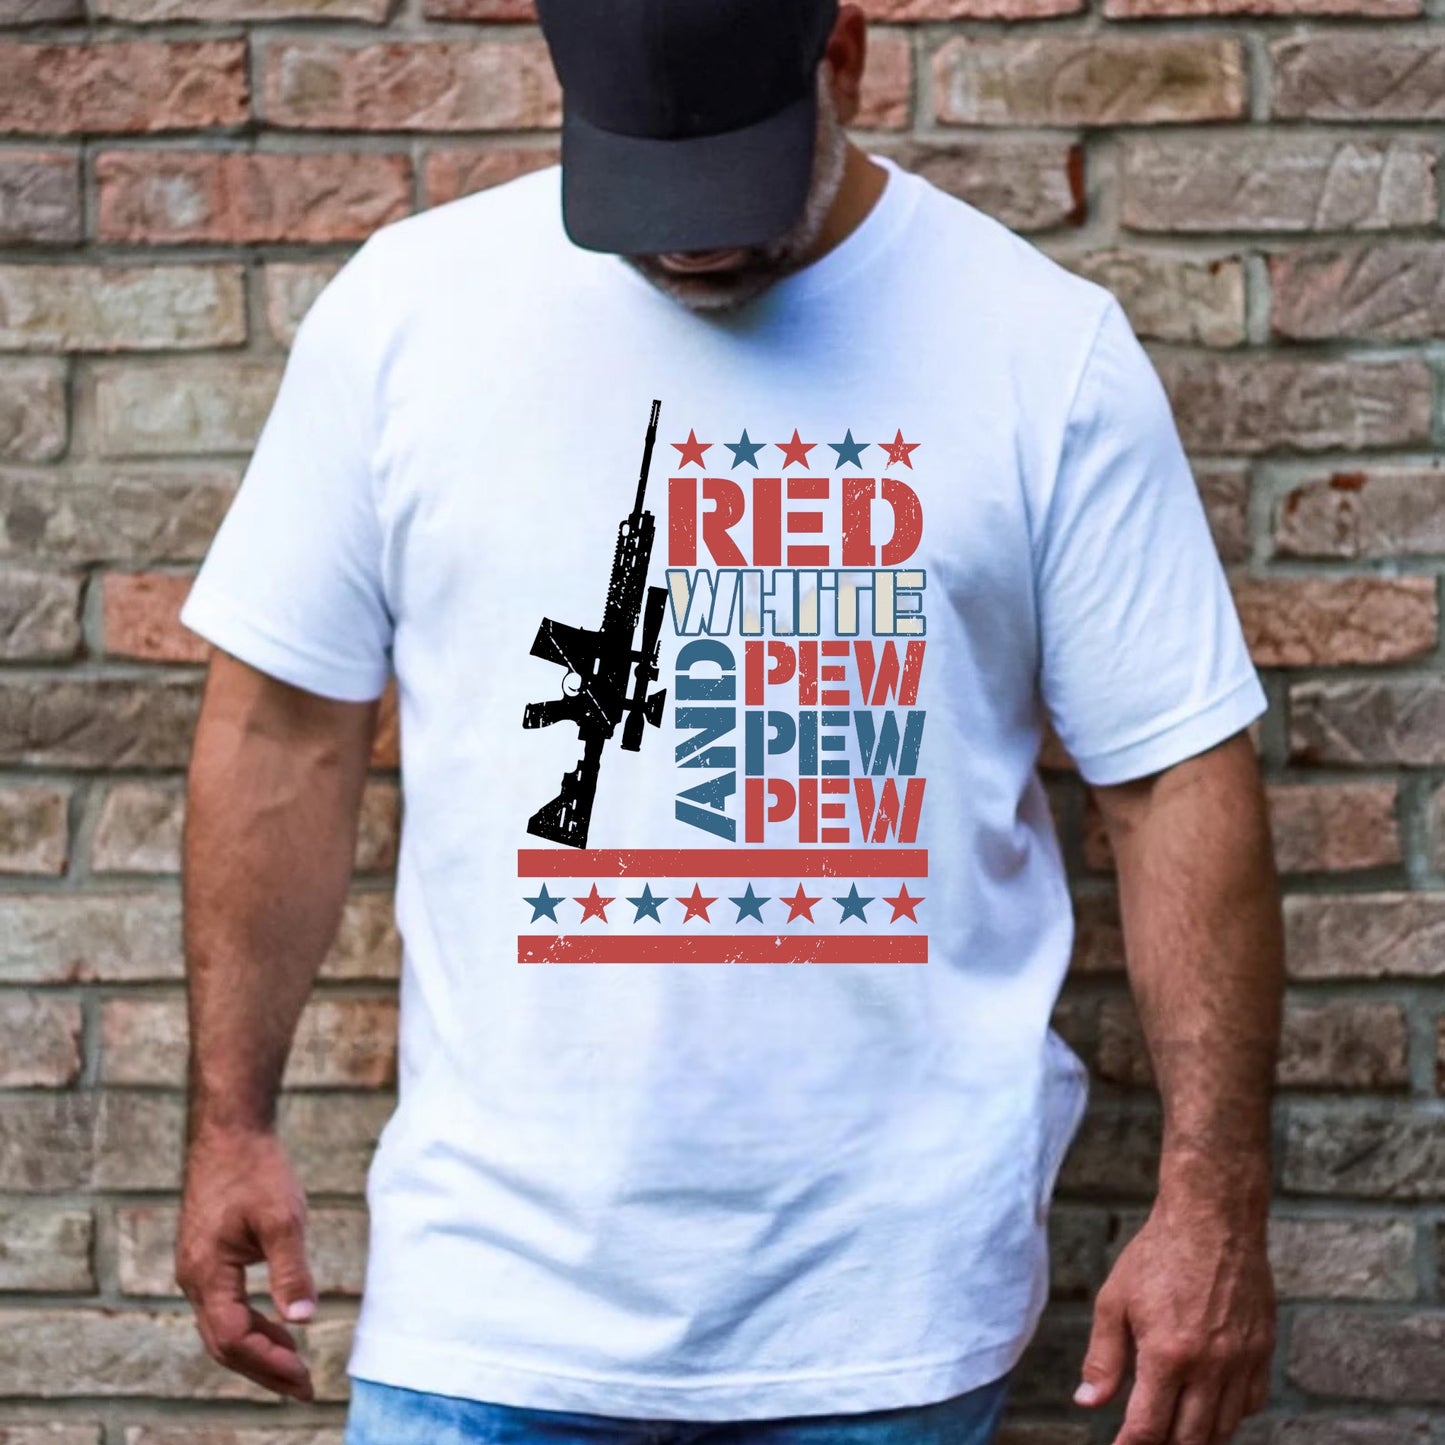 Red White & Pew Tee